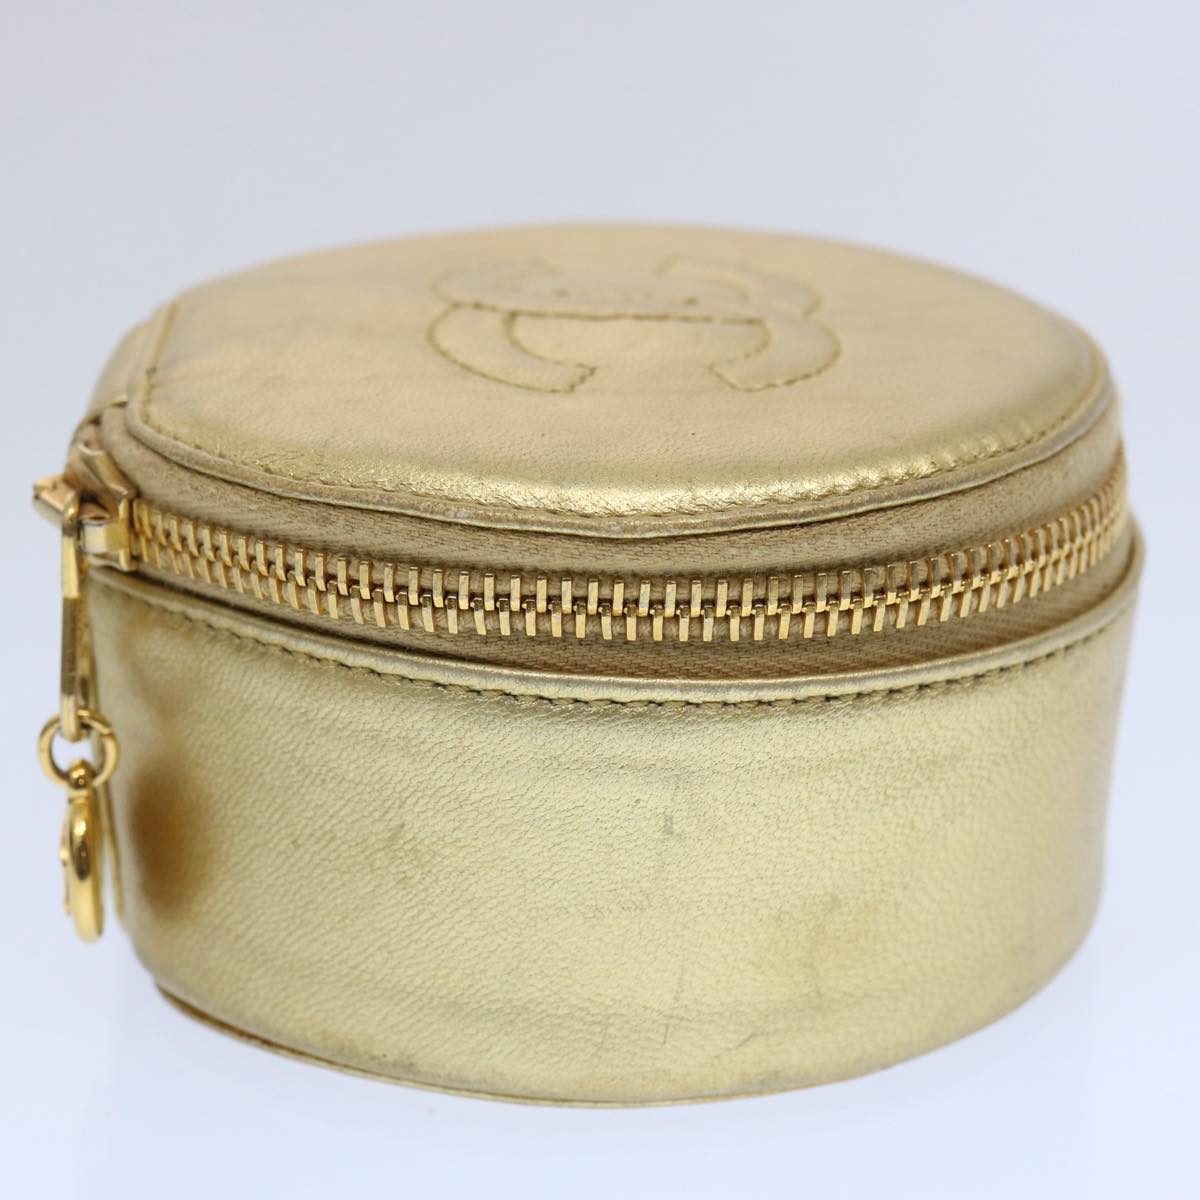 CHANEL Accessory Case Lamb Skin Gold CC Auth bs10787